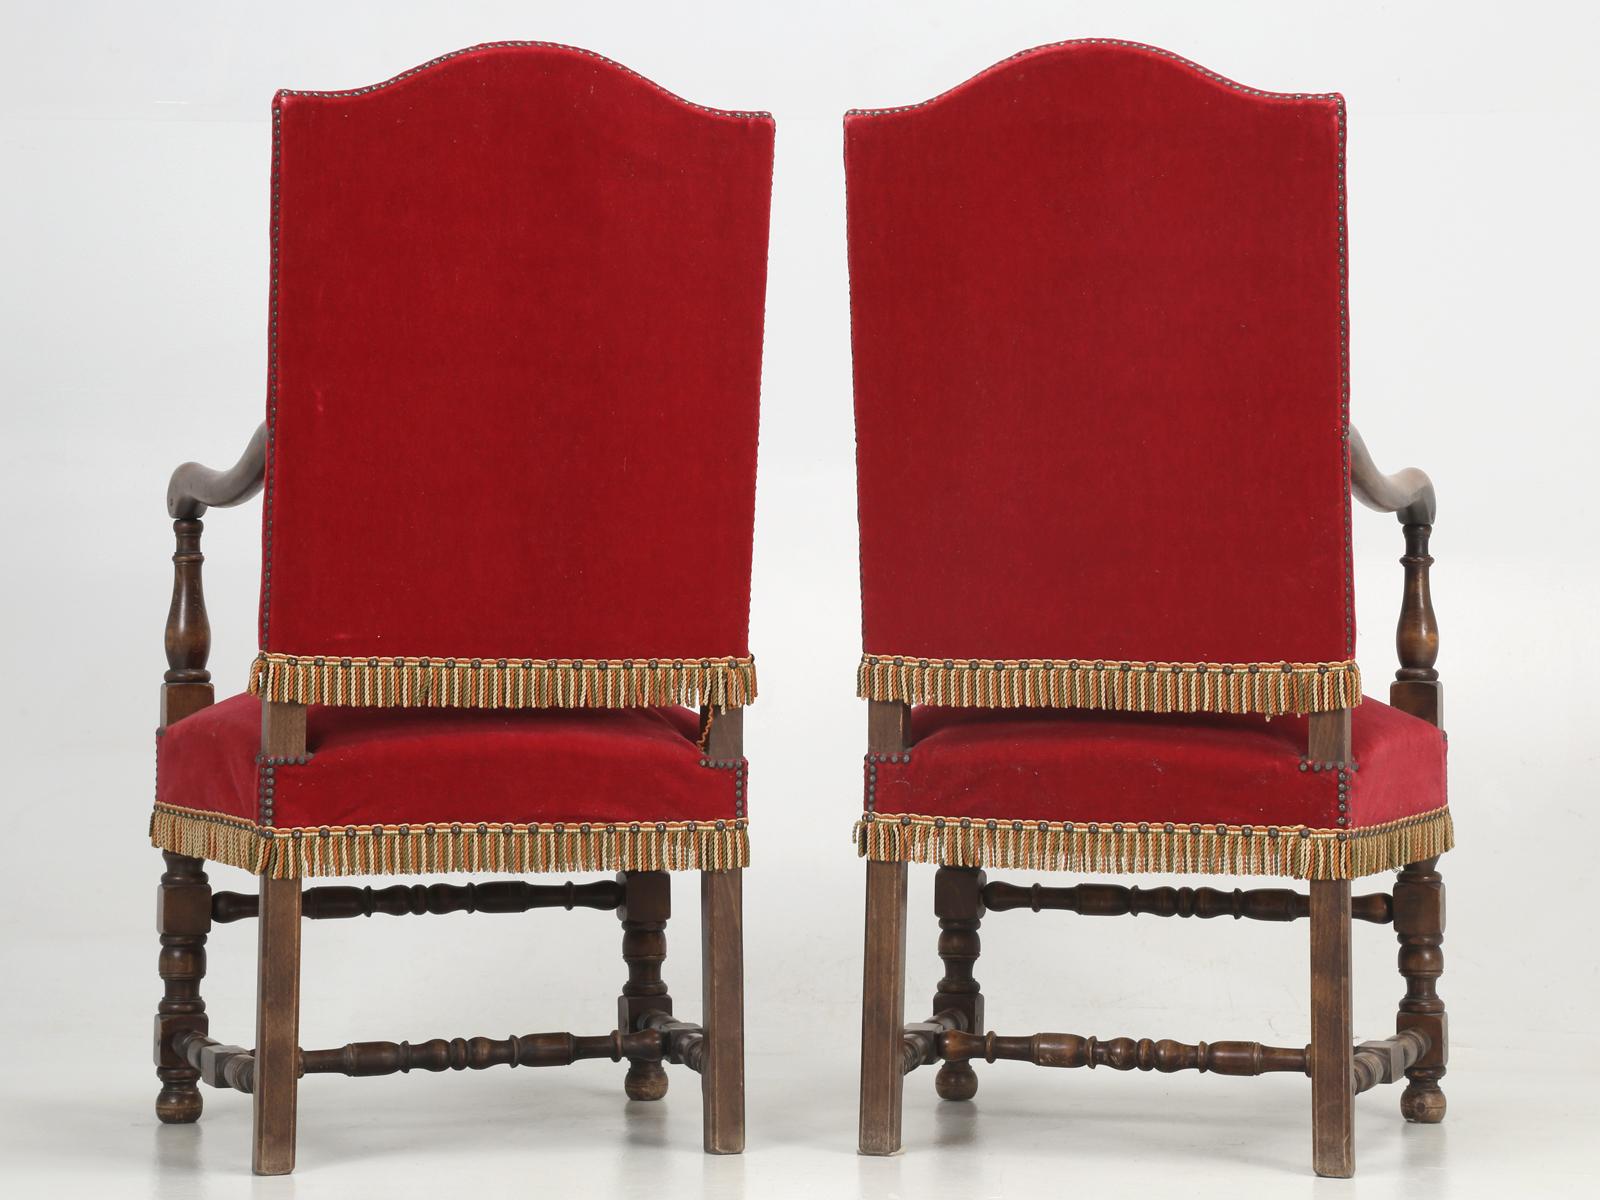 Antique Pair of French Arm or Throne Chairs, circa 1880 For Sale 5